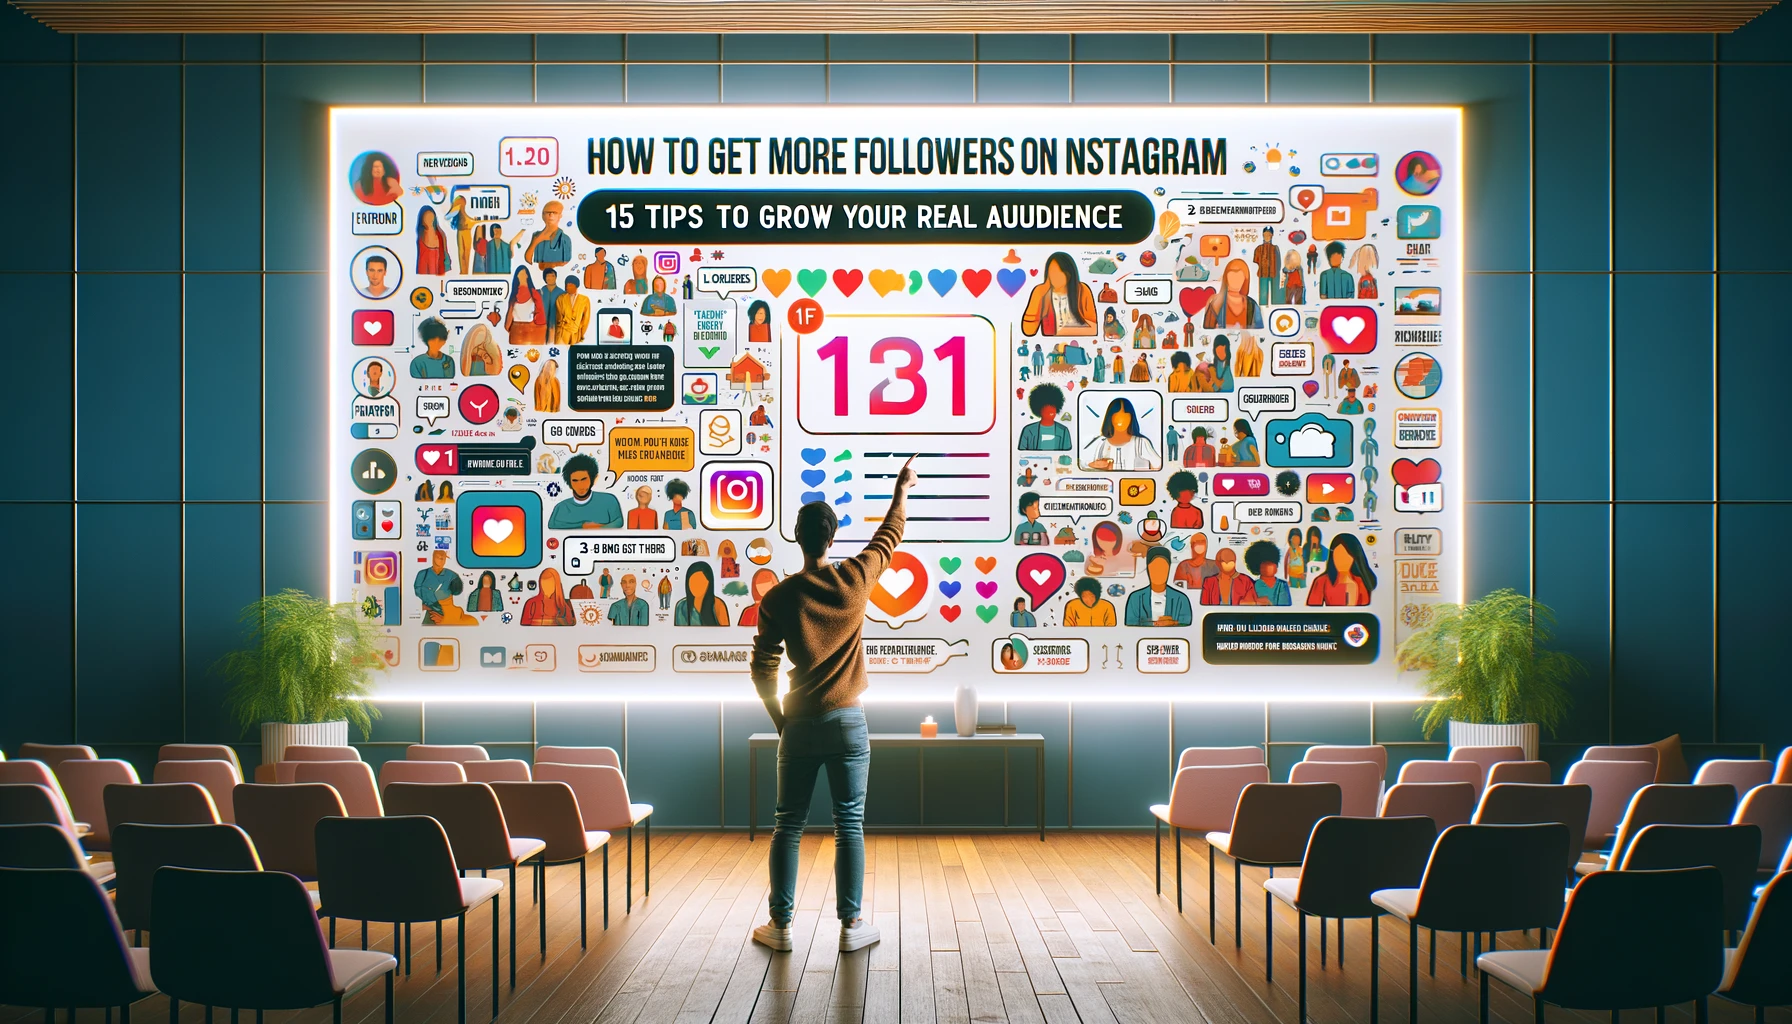 How To Get More Followers On Instagram: 15 Tips To Grow Your Real Audience